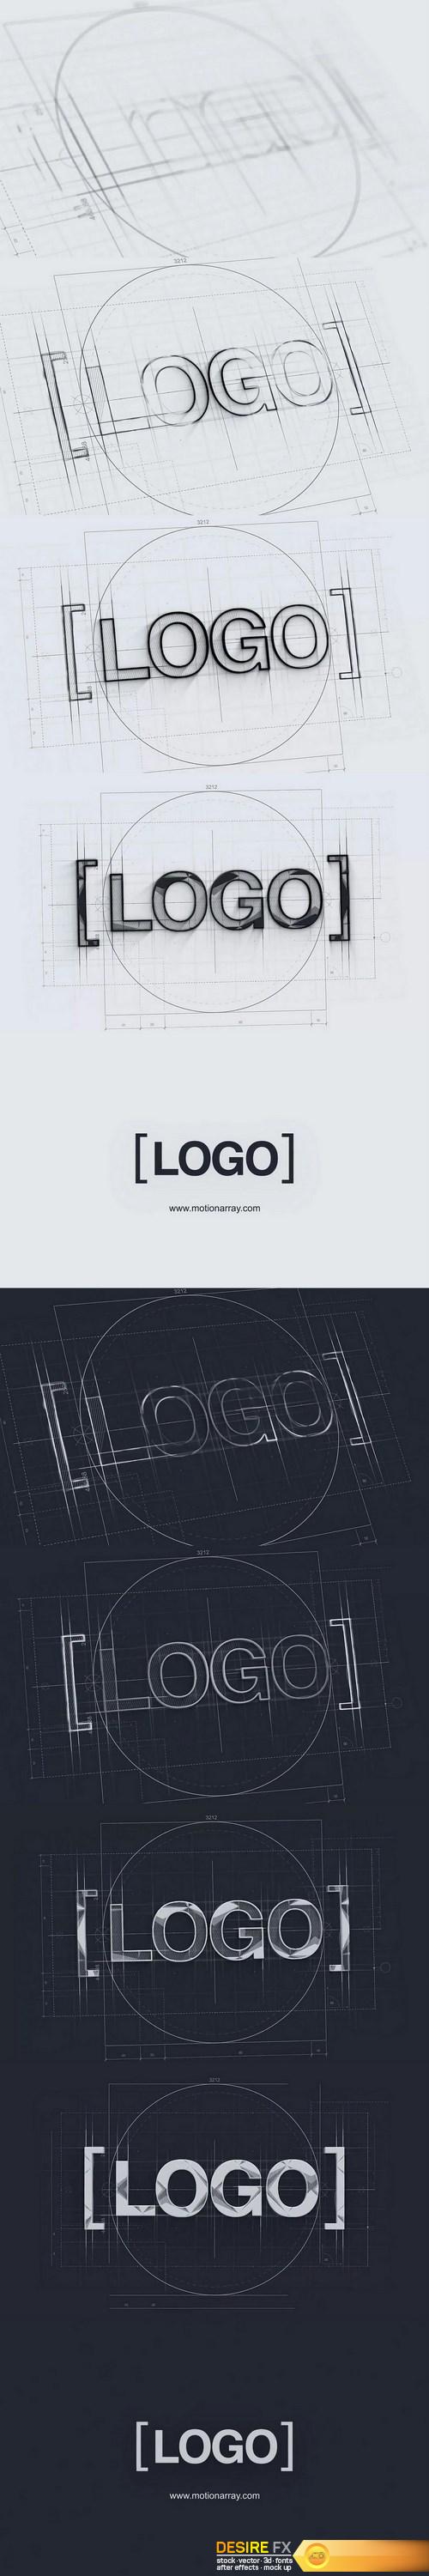 Technical Sketch Logo Effects Templates